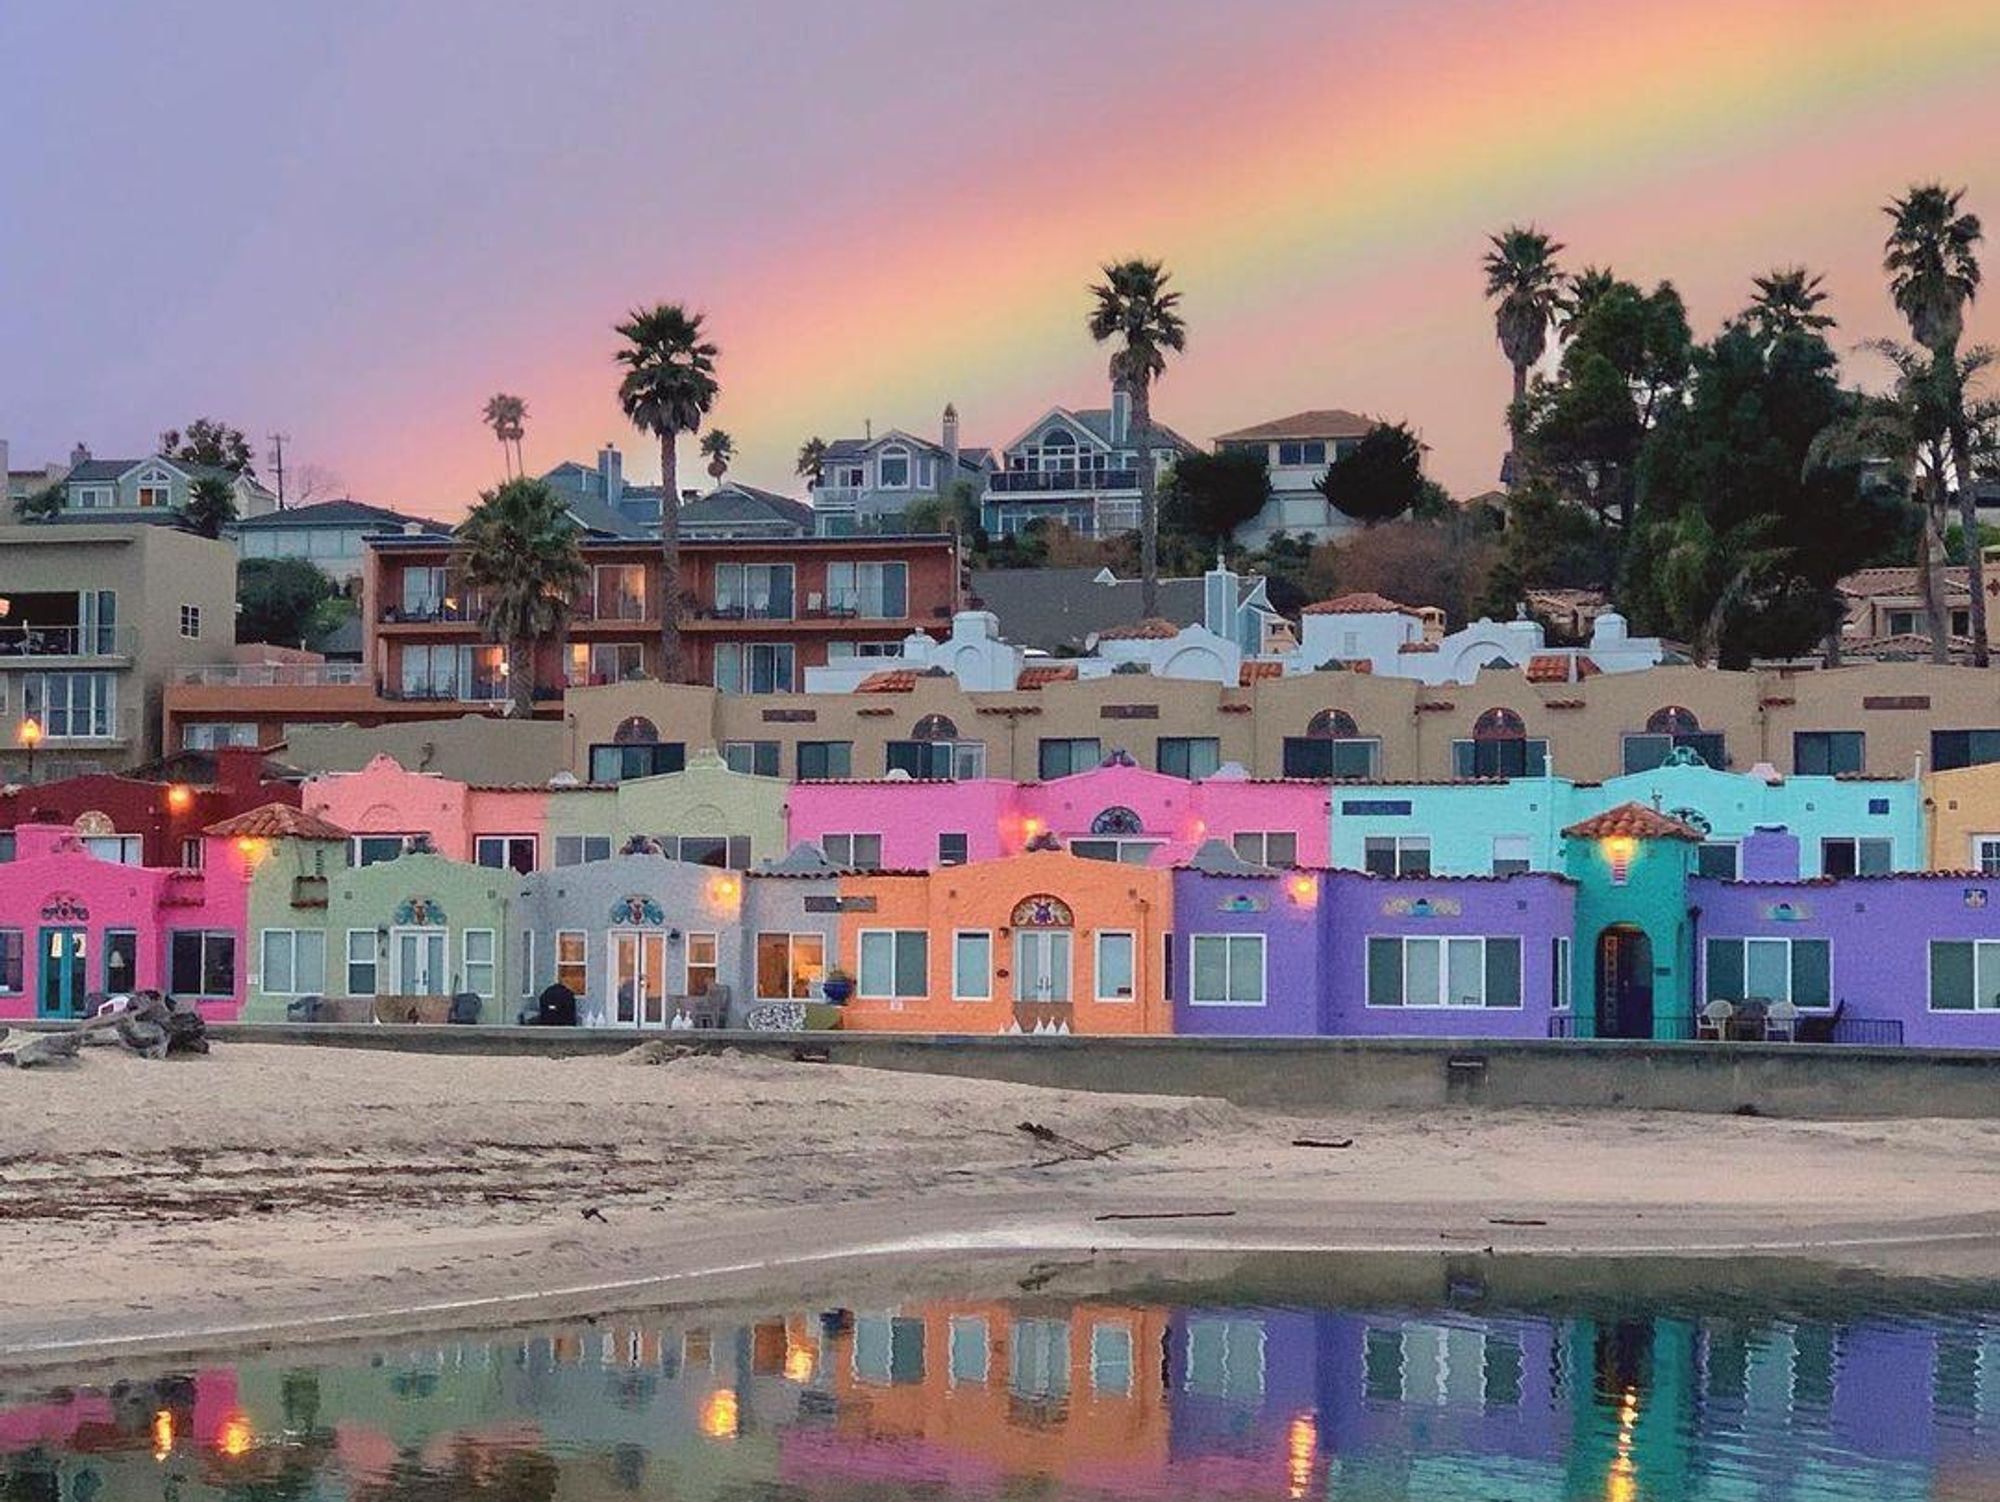 6 Northern California Towns You Haven't Heard of but Are Charming AF